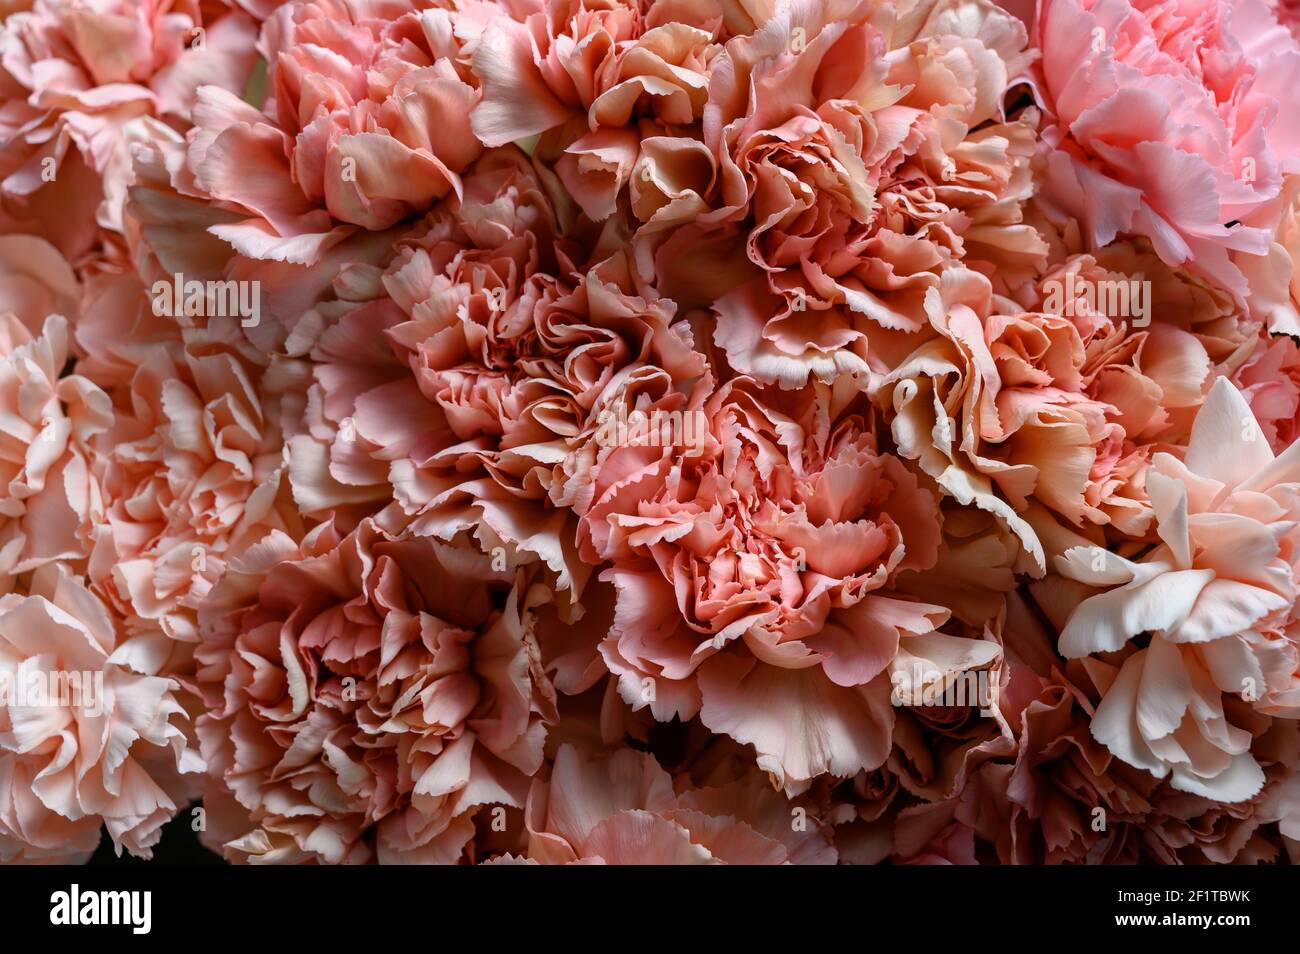 Pink carnation flowers. Top view. Close up carnation flower texture Stock Photo